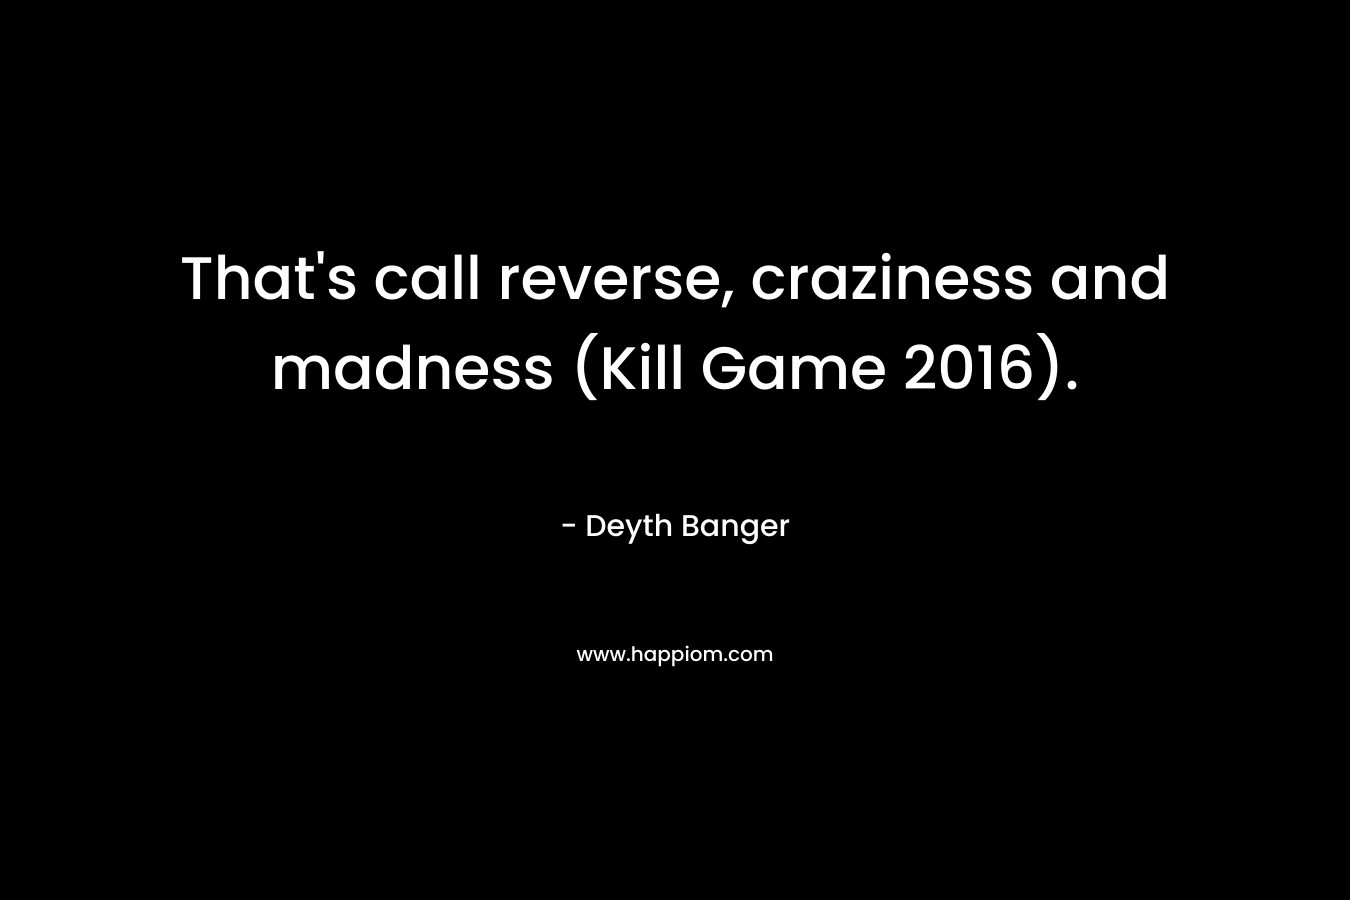 That’s call reverse, craziness and madness (Kill Game 2016). – Deyth Banger